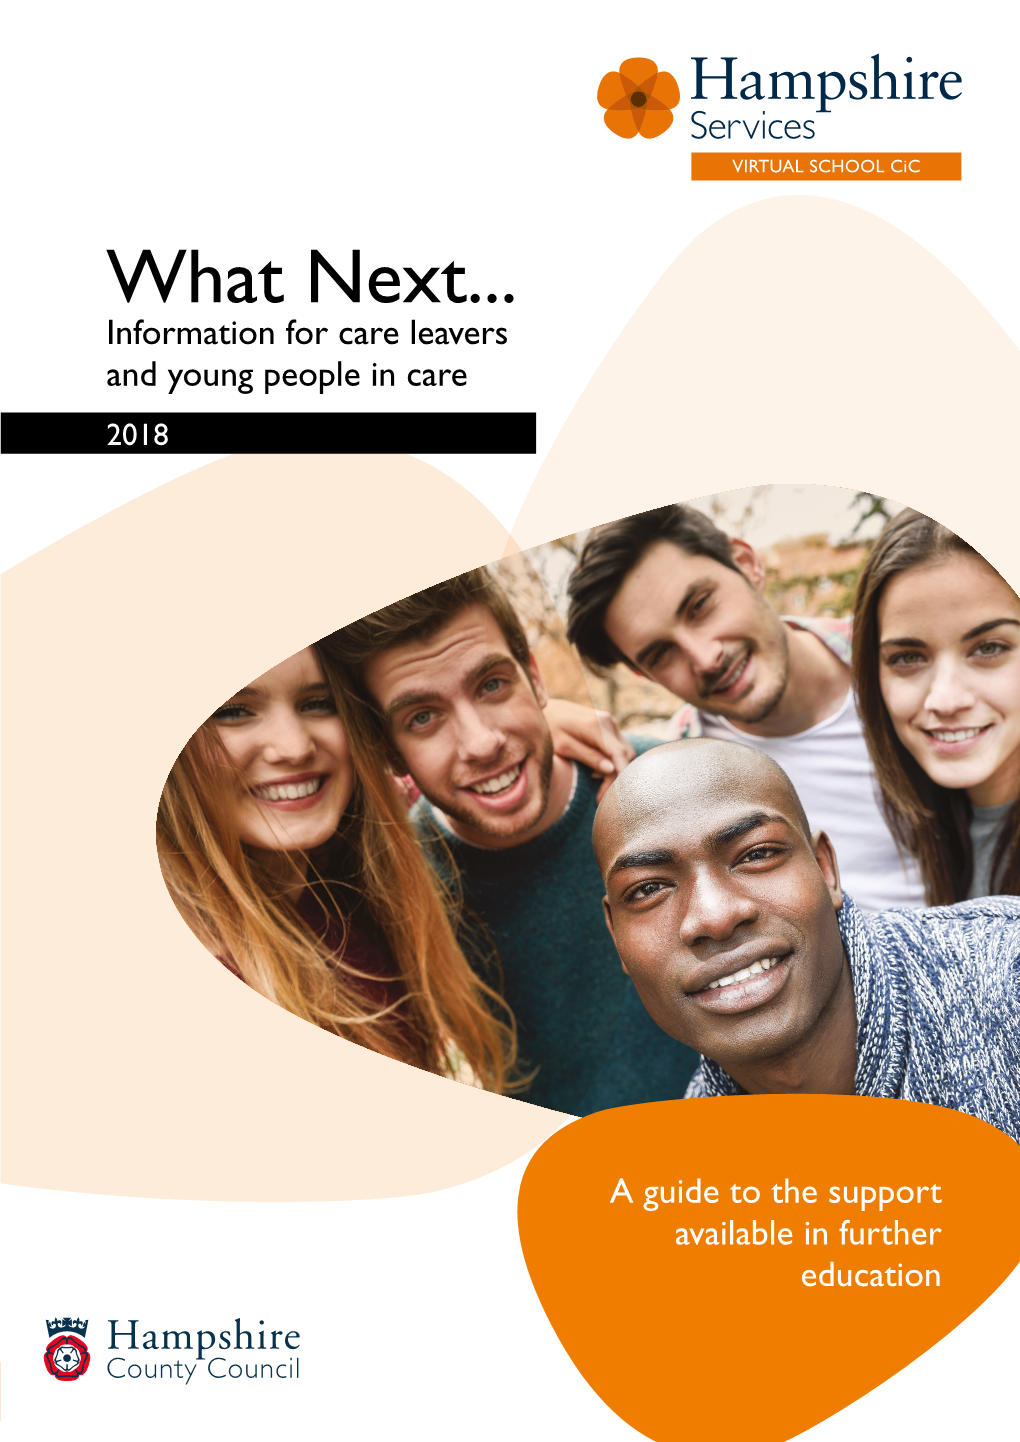 What Next... Information for Care Leavers and Young People in Care 2018